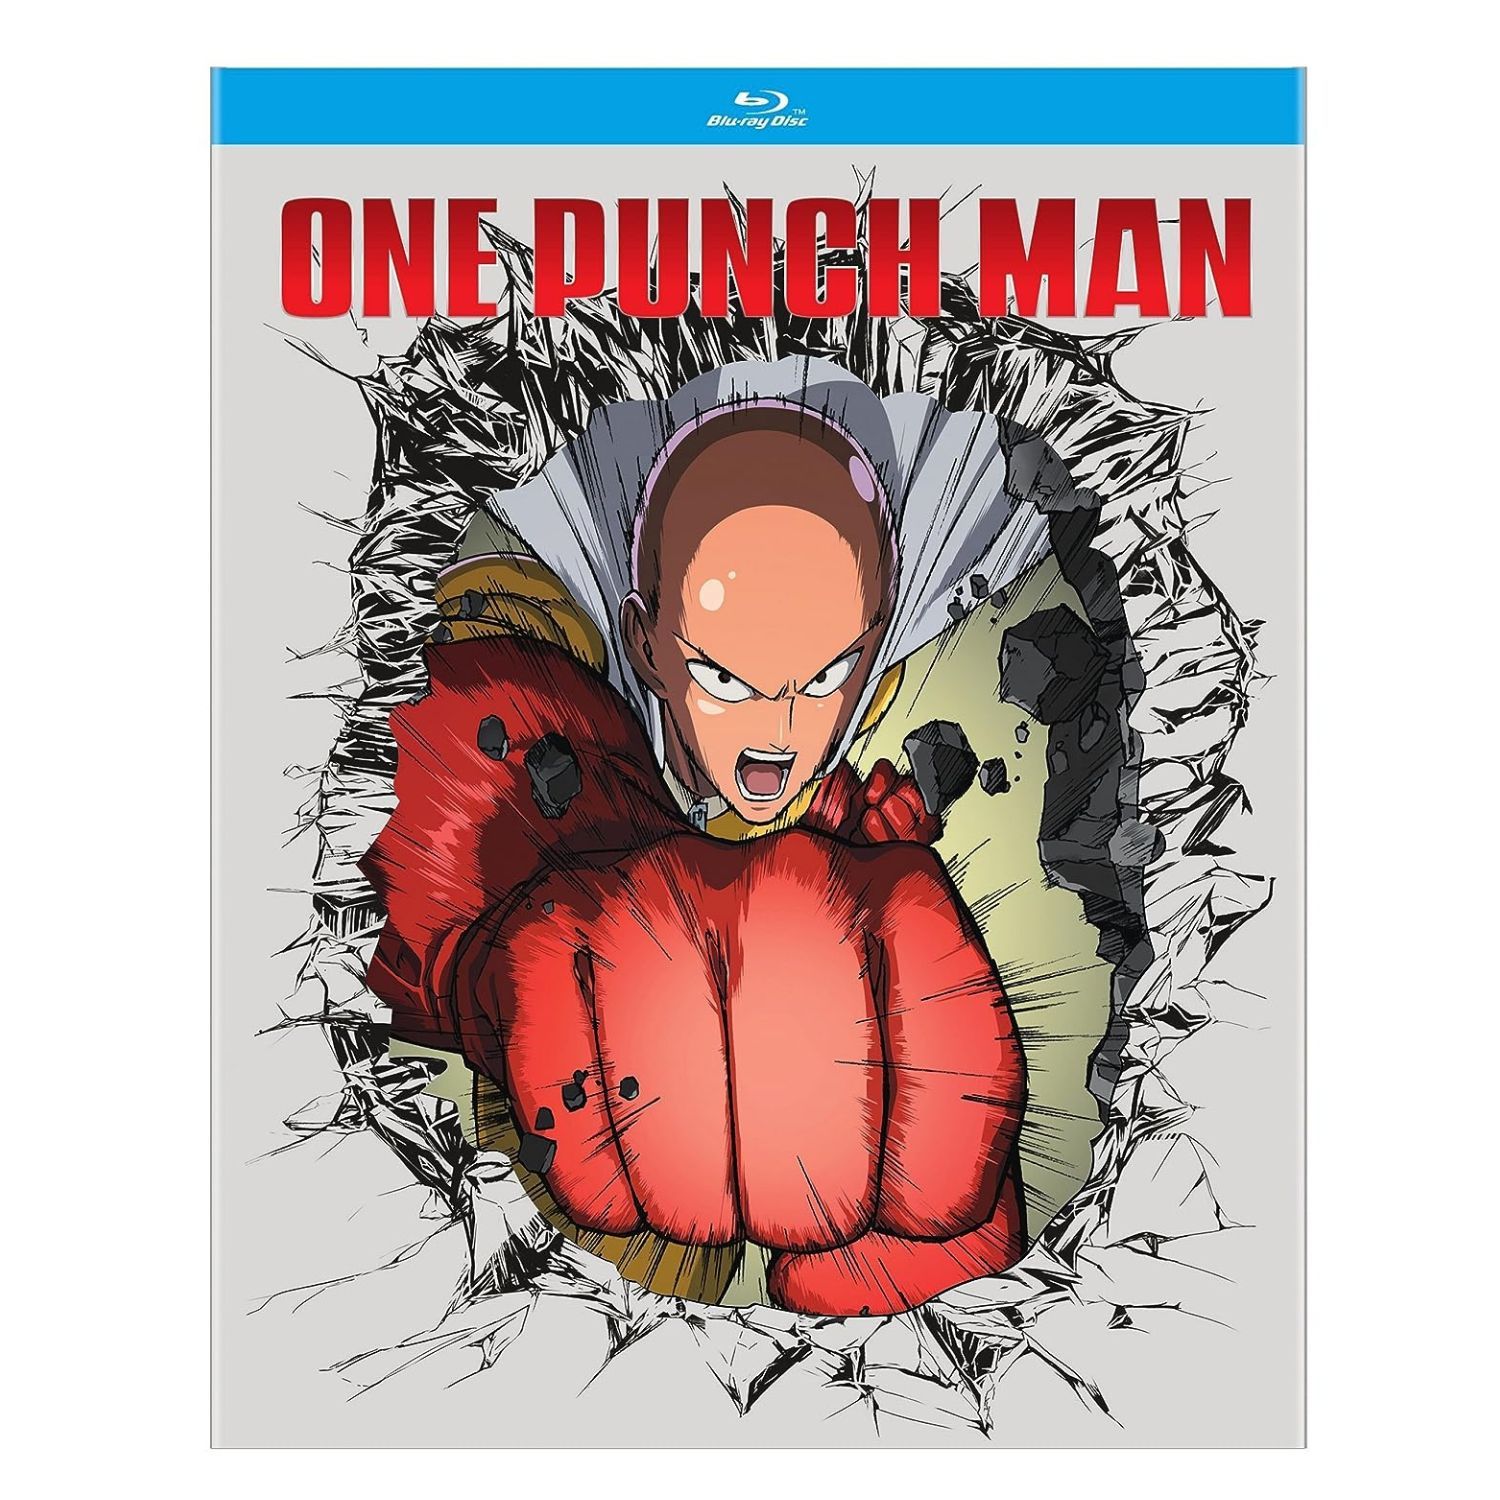 One Punch Man Blu-ray cover